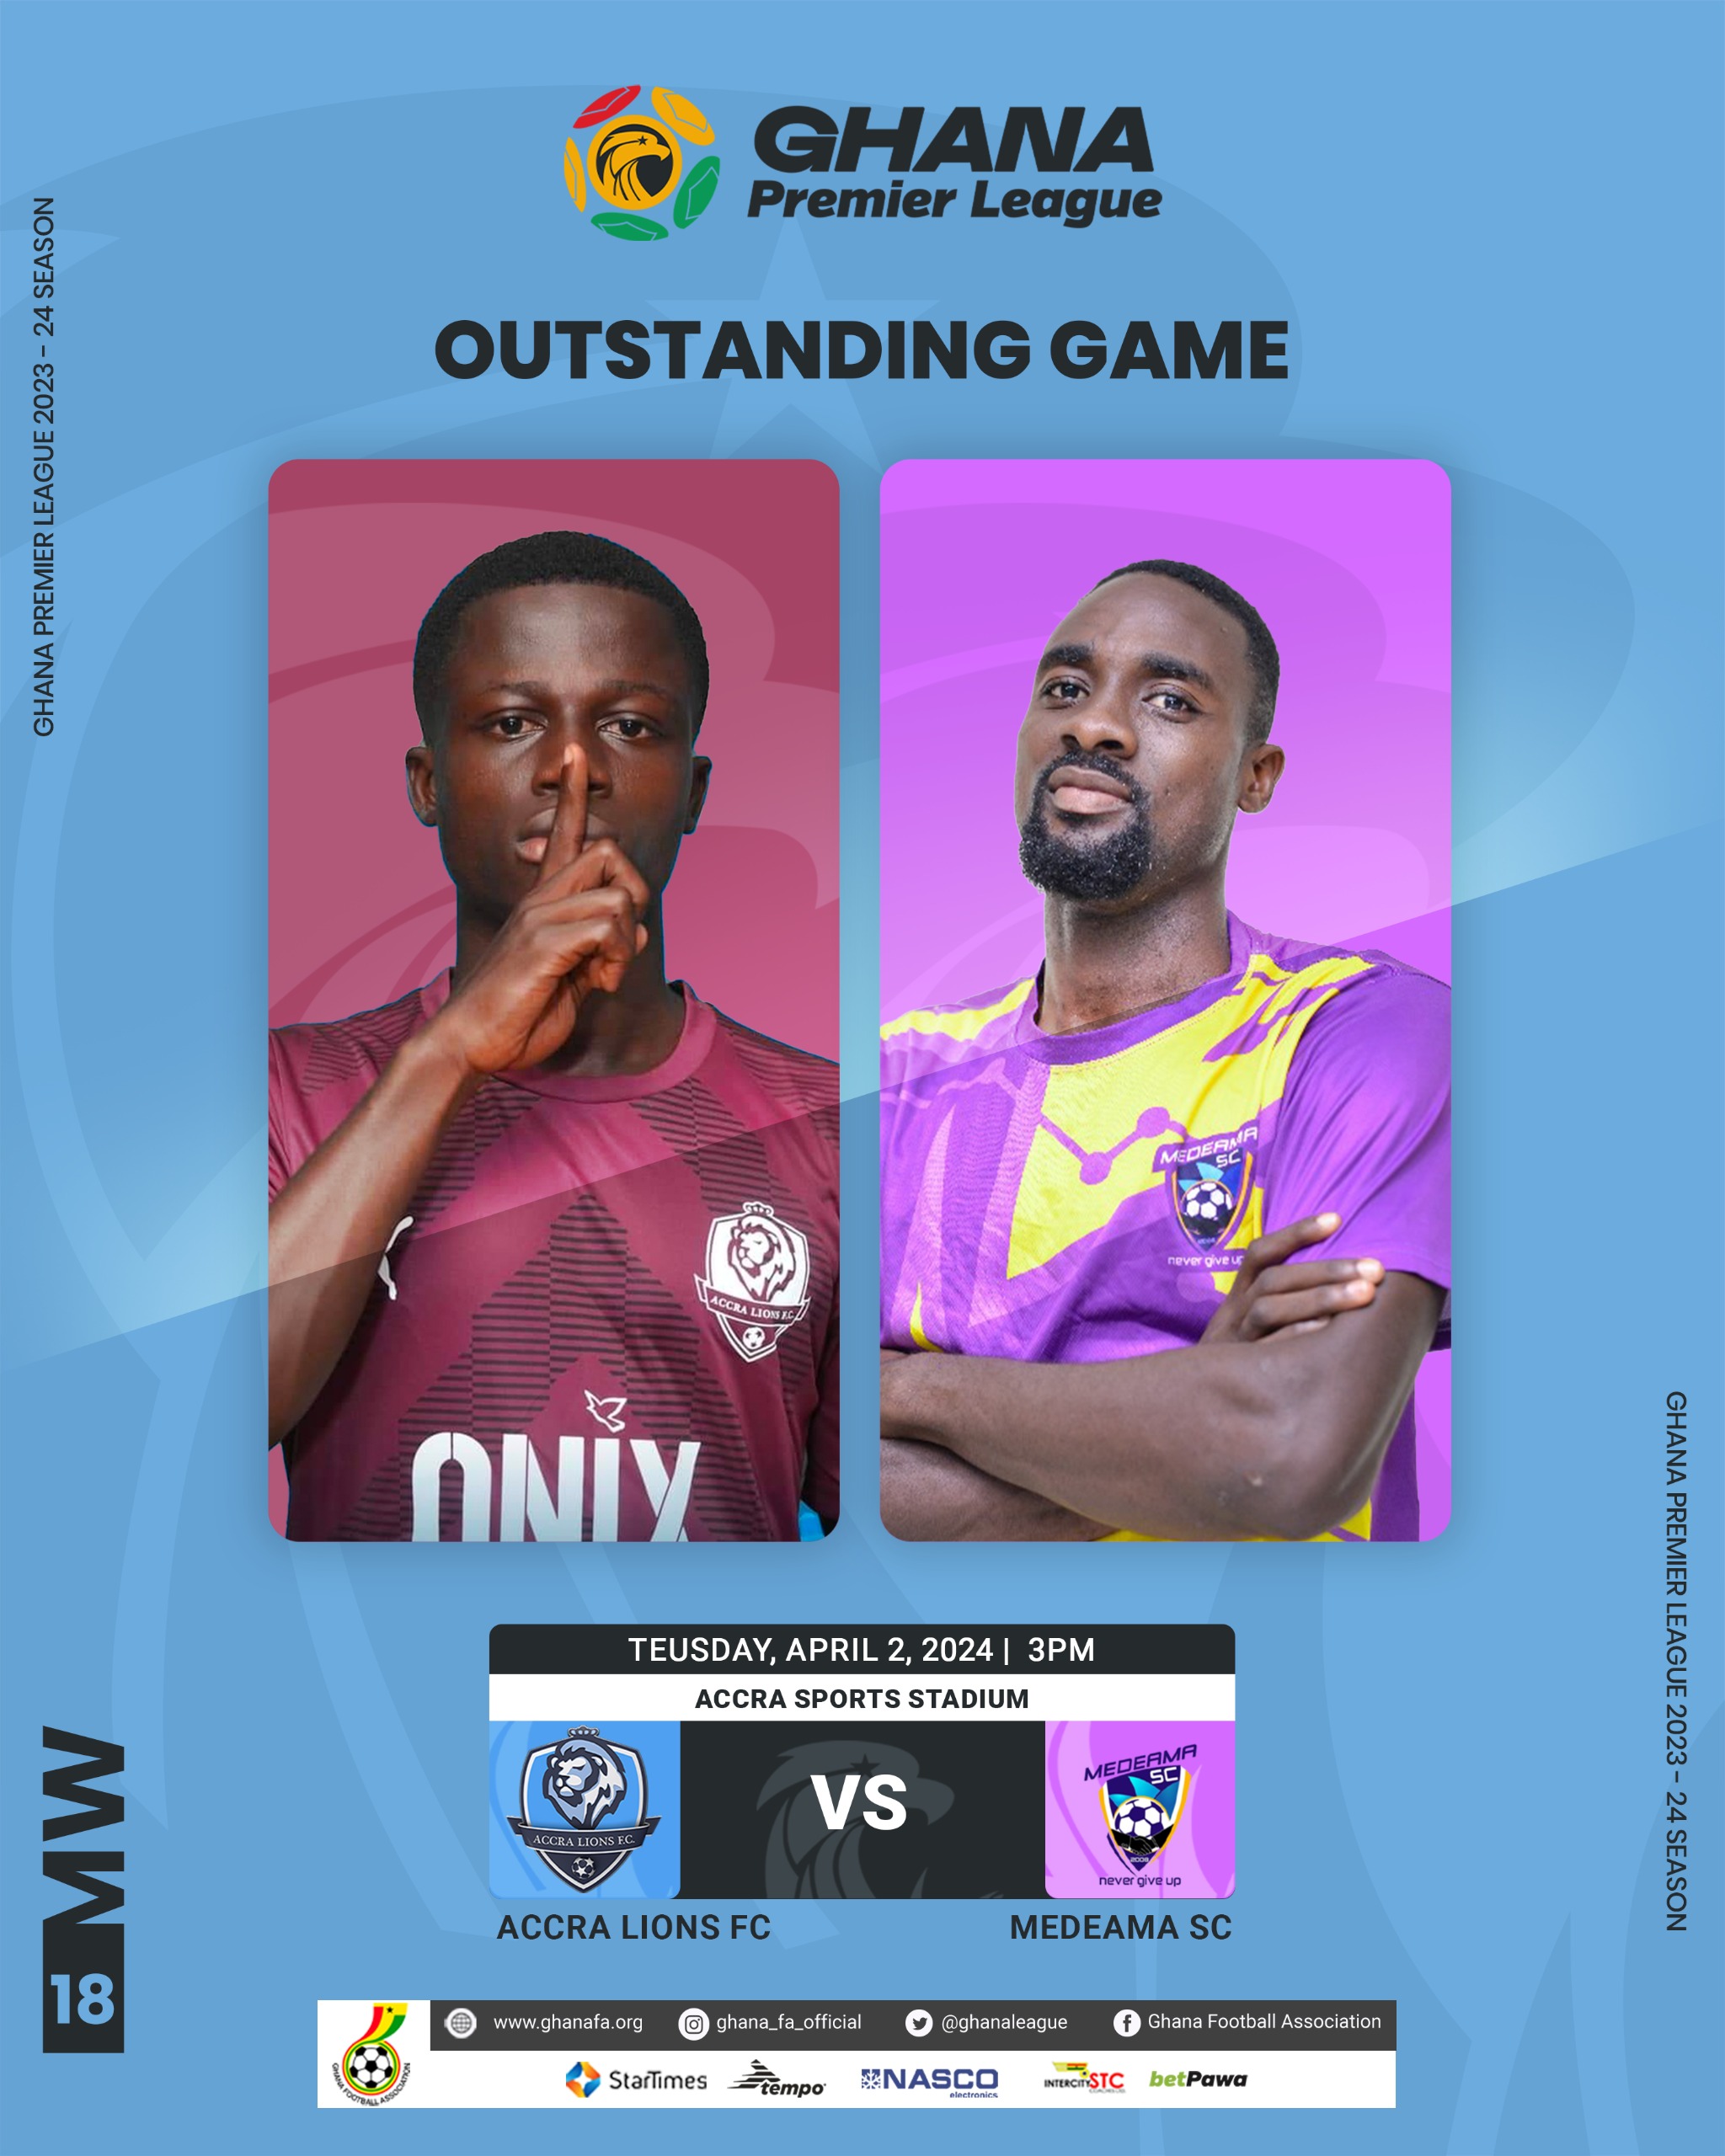 Accra Lions vs Medeama SC outstanding League game to be played on April 2